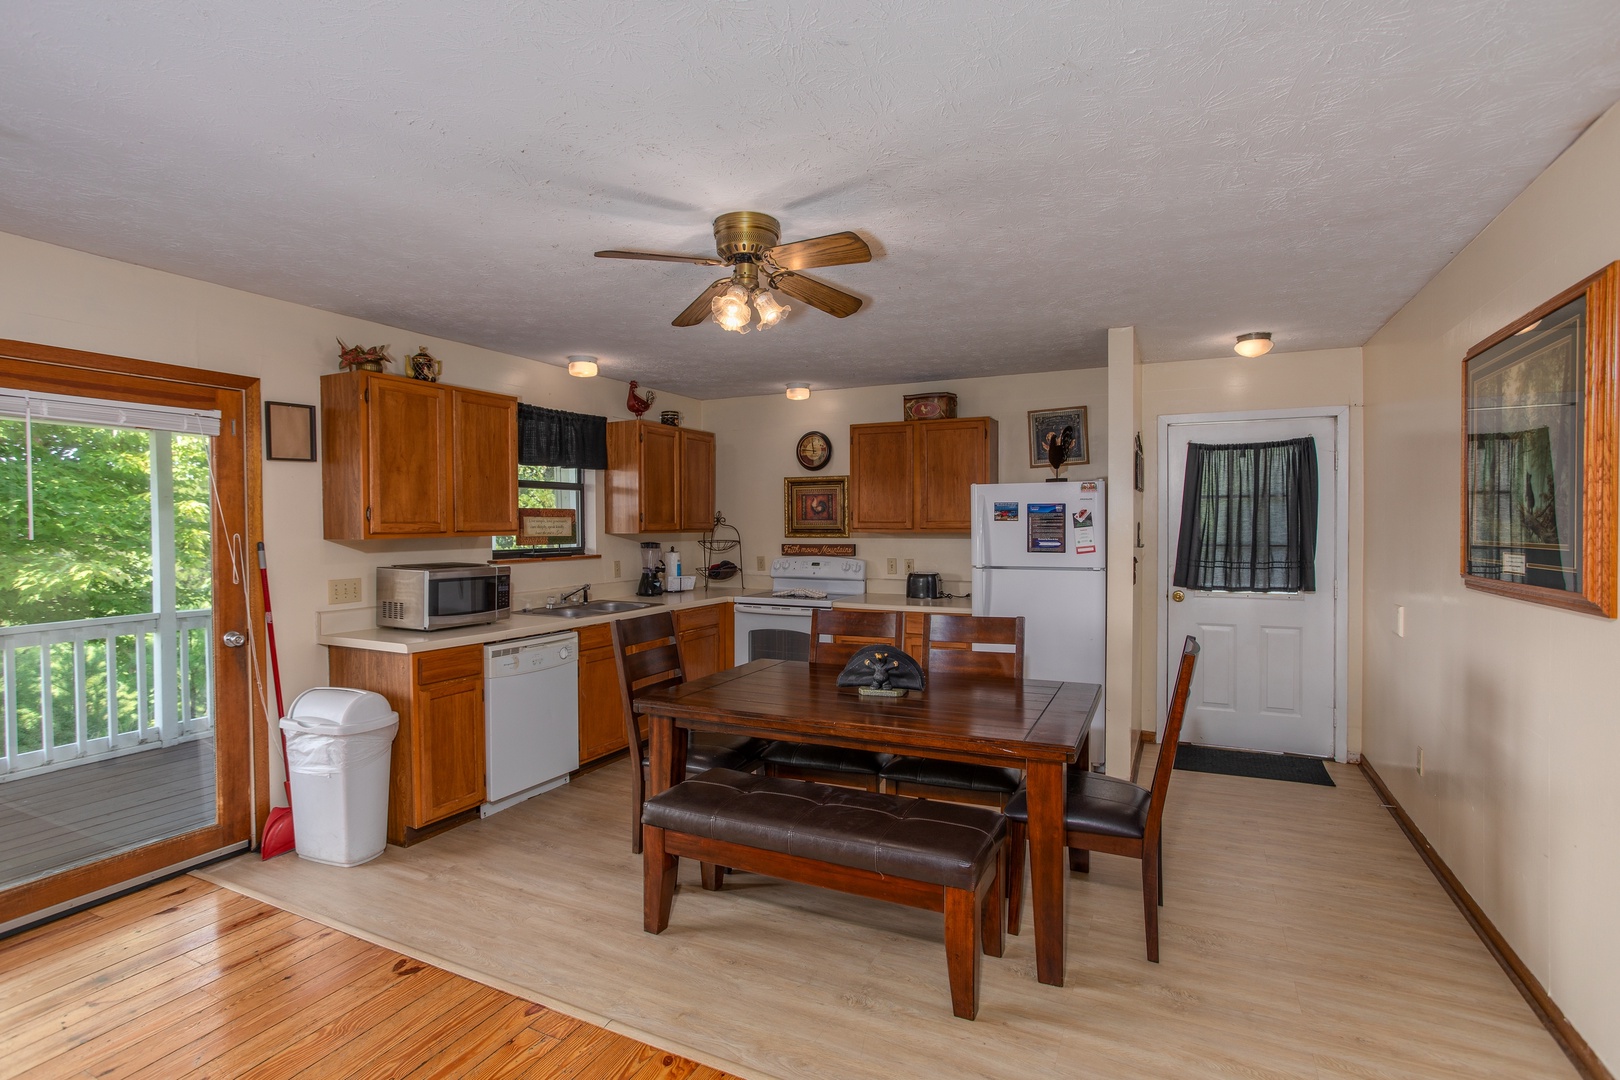 Kitchen with white appliances and dining space for six at Black Bear Ridge, a 3-bedroom cabin rental located in Pigeon Forge